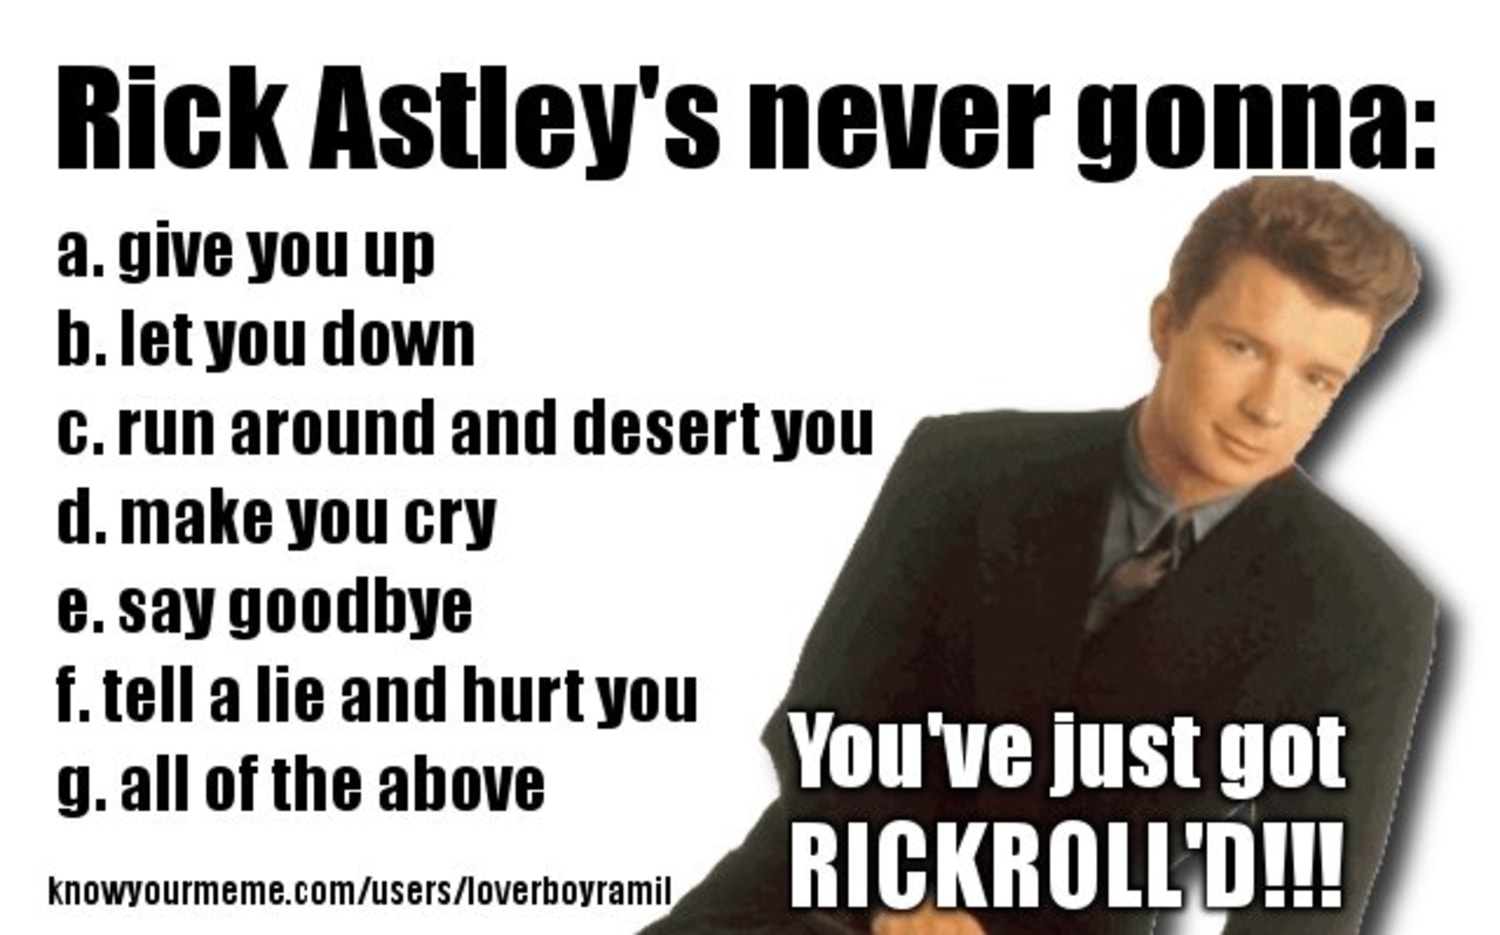 News of 'Rickroll' meme death greatly exaggerated